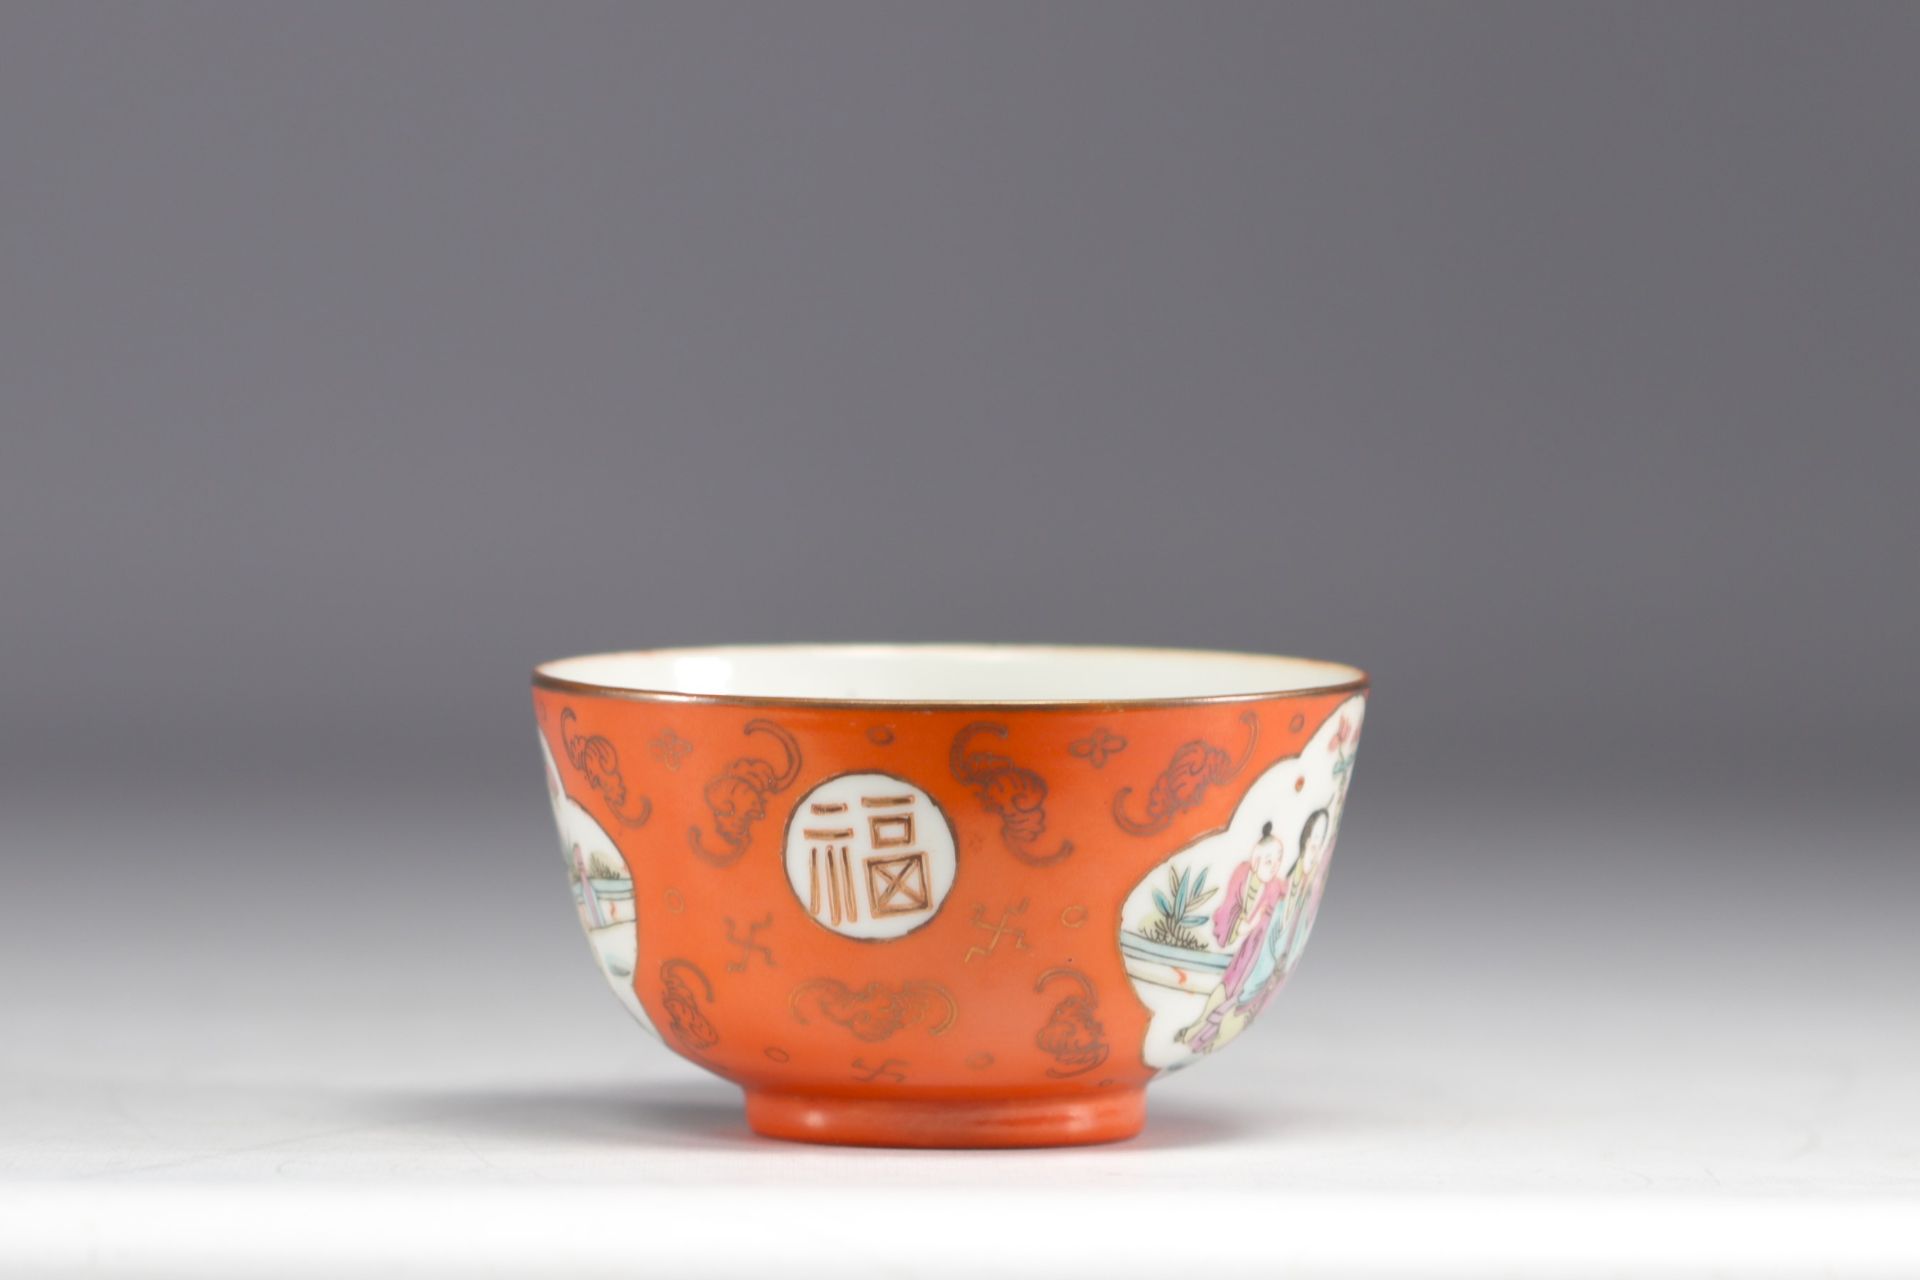 China - An orange porcelain bowl decorated with figures and bats, 19th century. - Image 2 of 5